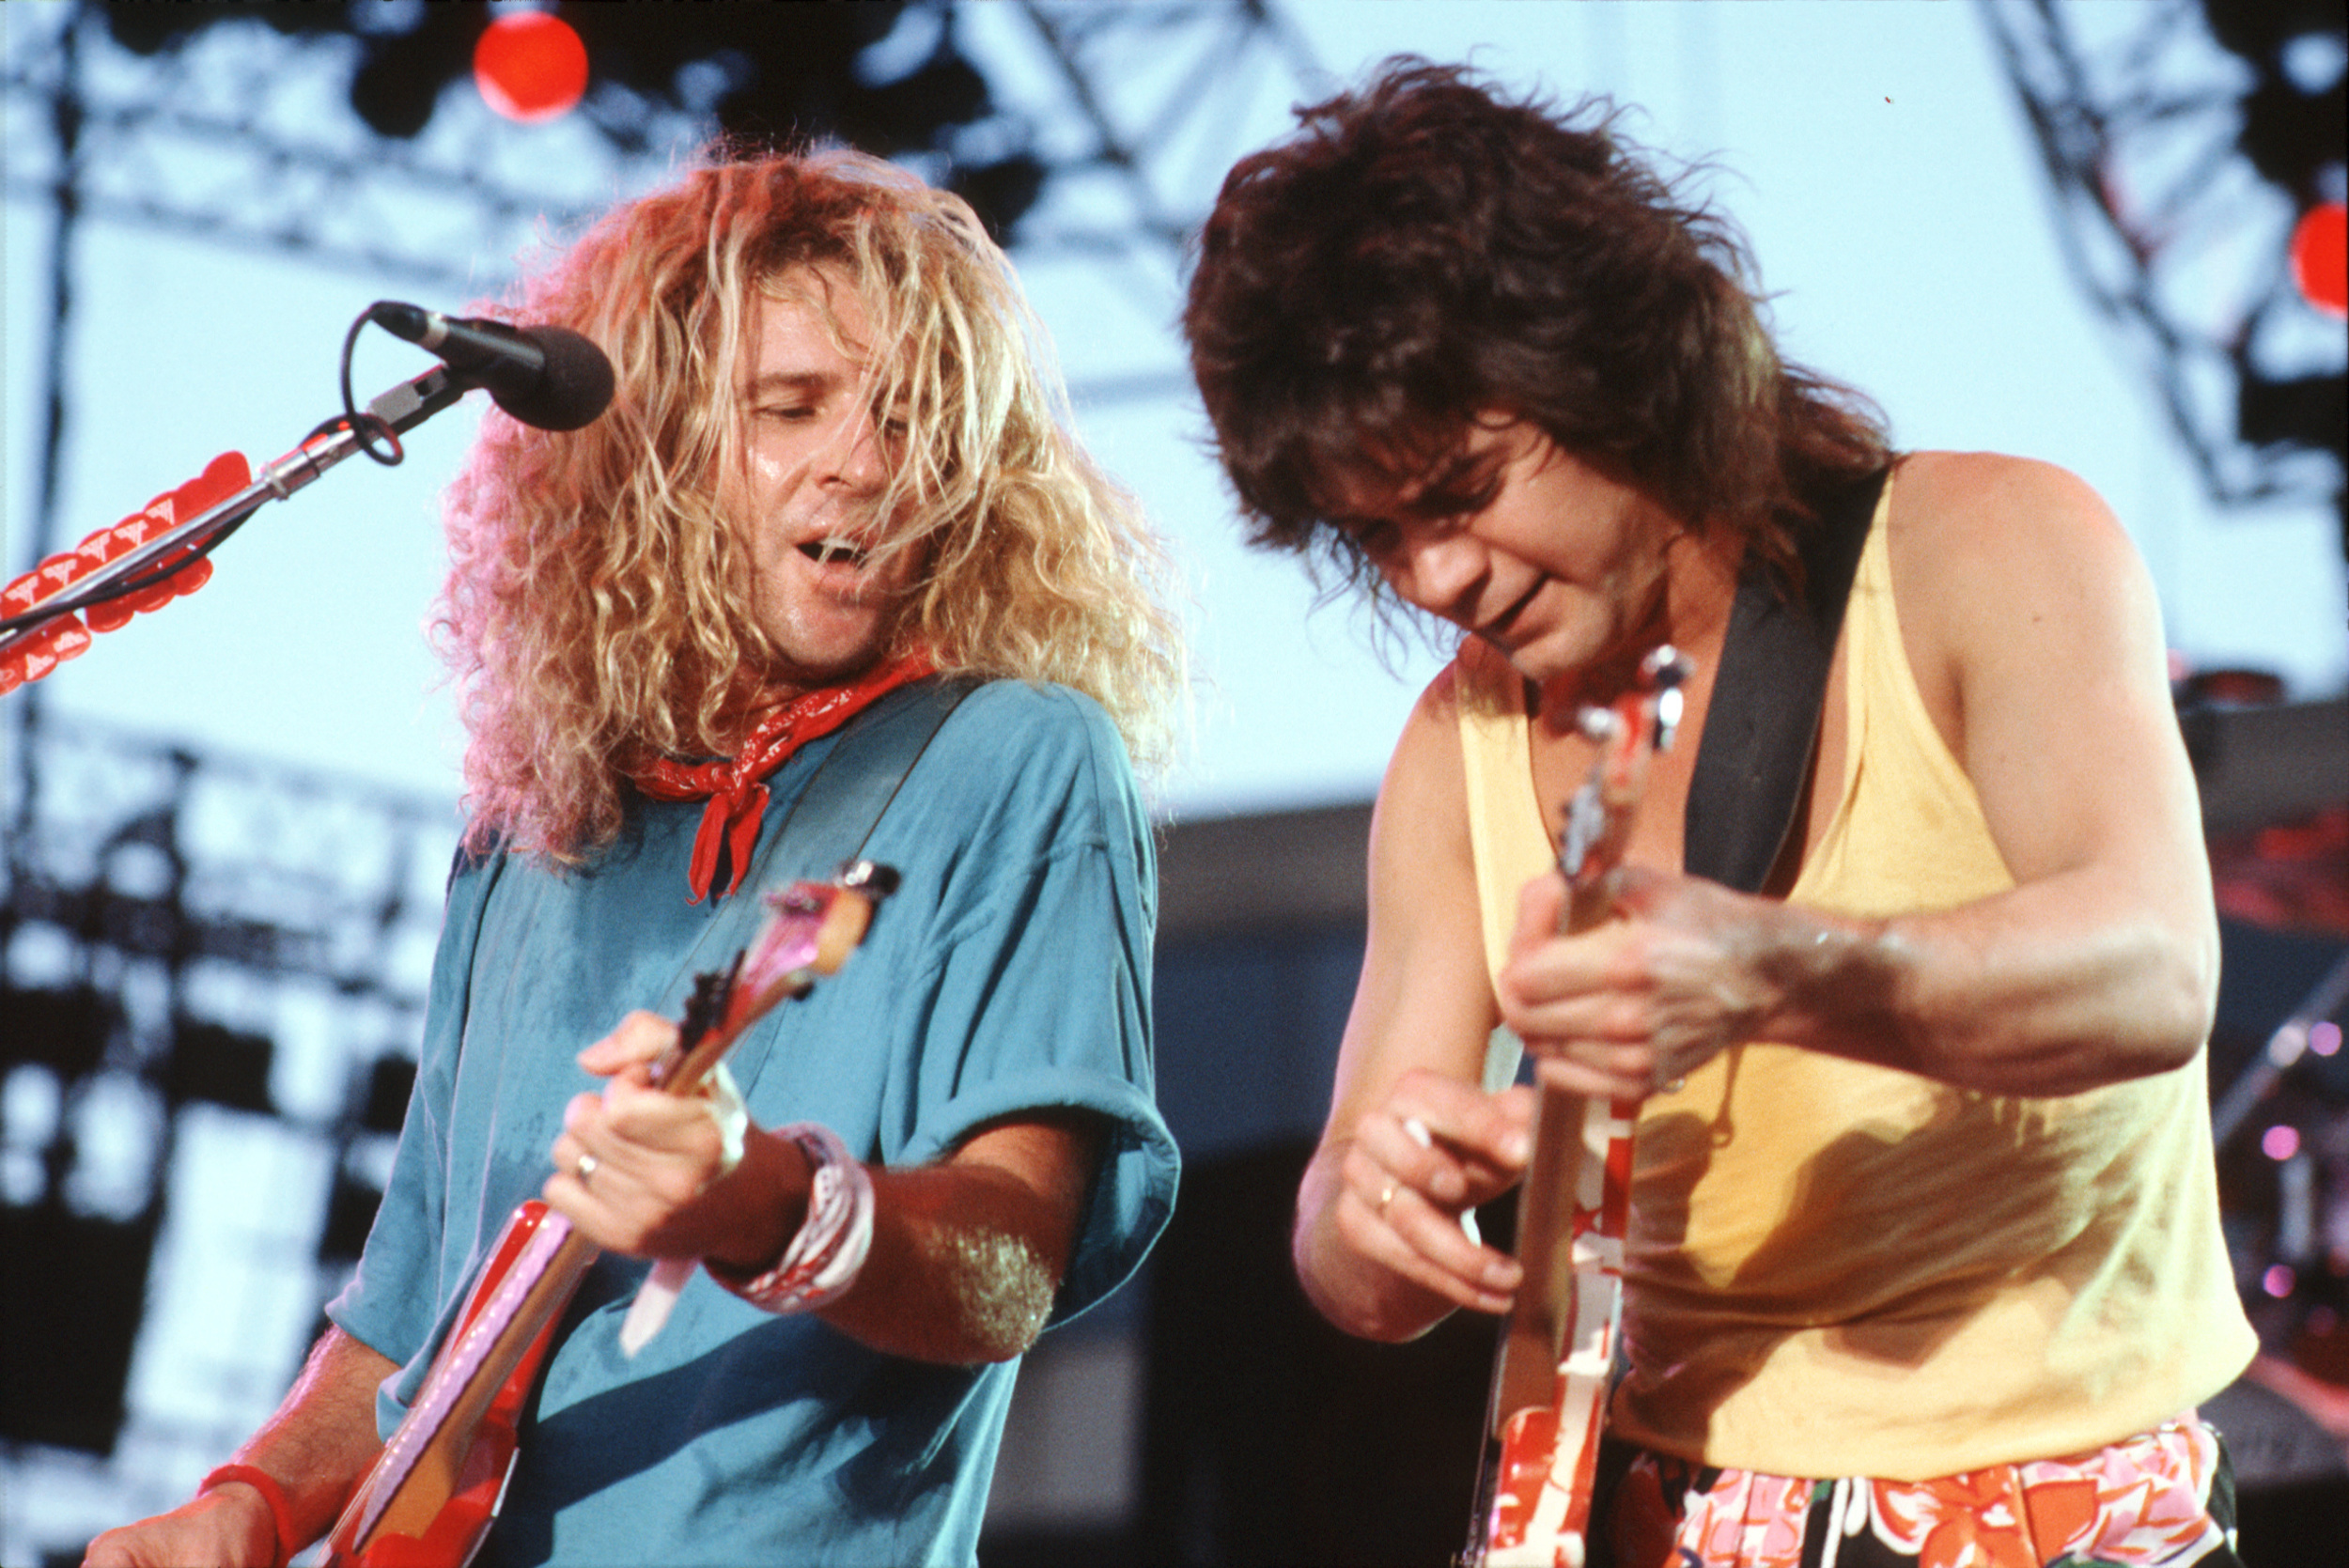 <p>The Dave vs. Sammy argument will never fizzle out. Van Halen was a popular rock band with David Lee Roth through the late 1970s and into the '80s but didn't really enjoy mainstream success until <em>1984</em> came out. When Sammy Hagar joined the band in time to cut <a href="https://www.youtube.com/watch?v=1VaEdKwXJhM"><em>5150</em></a> (1986), Eddie Van Halen's synthesizer use increased, and the music had a more made-for-MTV vibe. The result: four straight U.S. No. 1 records with Hagar in tow: <em>5150</em>, <a href="https://www.youtube.com/watch?v=OZGXRCI-JzQ"><em>OU812</em></a> (1988), <em>For Unlawful Carnal Knowledge </em>(1991), and <em>Balance </em>(1995)<em>.</em></p><p><a href='https://www.msn.com/en-us/community/channel/vid-cj9pqbr0vn9in2b6ddcd8sfgpfq6x6utp44fssrv6mc2gtybw0us'>Follow us on MSN to see more of our exclusive entertainment content.</a></p>